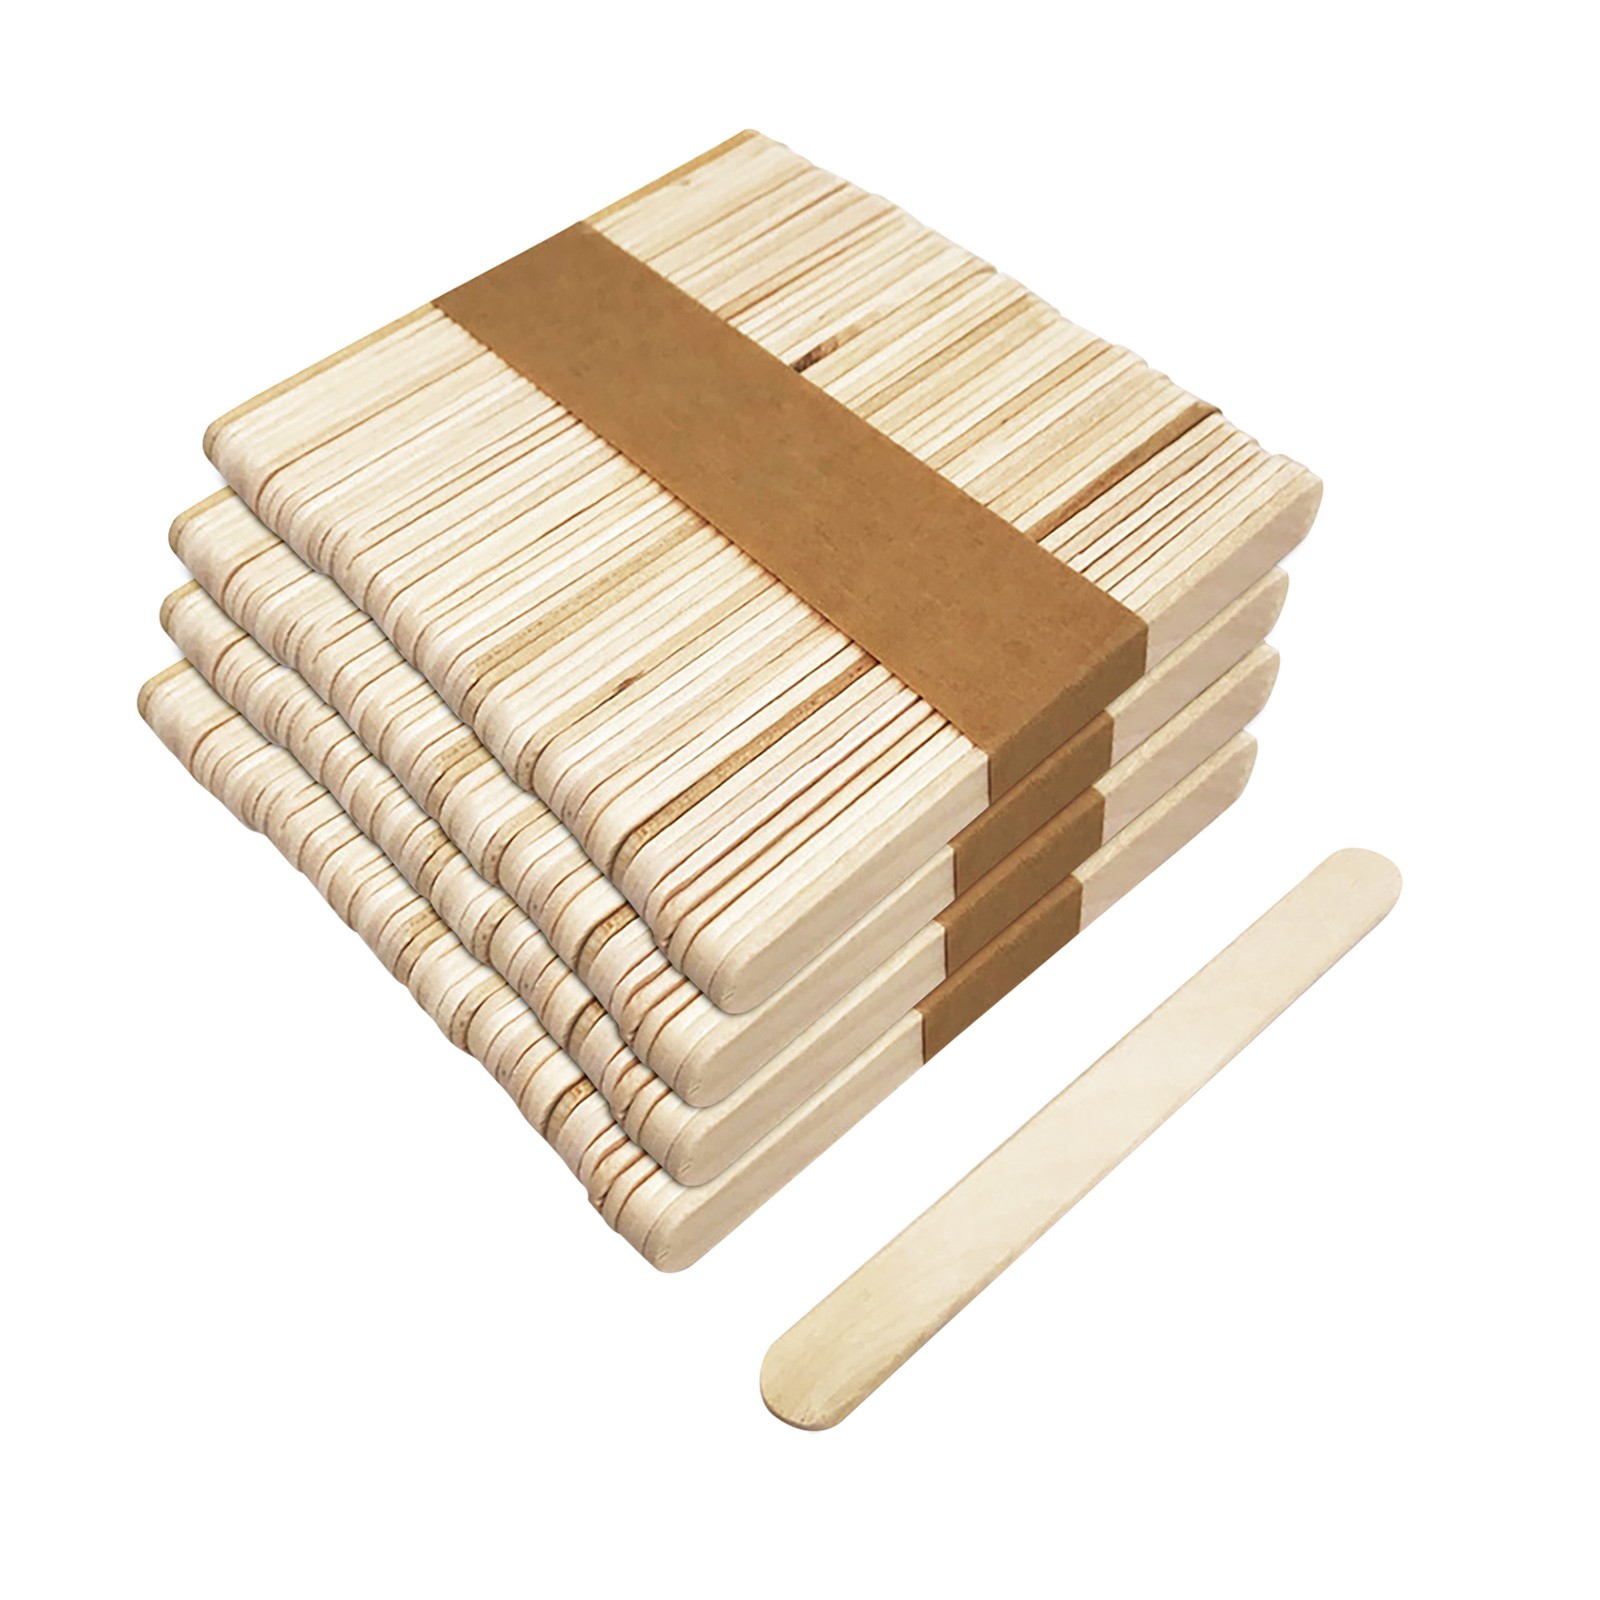 Wood Sticks Sticks Multi-Purpose ICES Wooden Waxing /200/300Count] Popsicle  Tongue [50/100/150 Craft Wax Ice Home DIY 